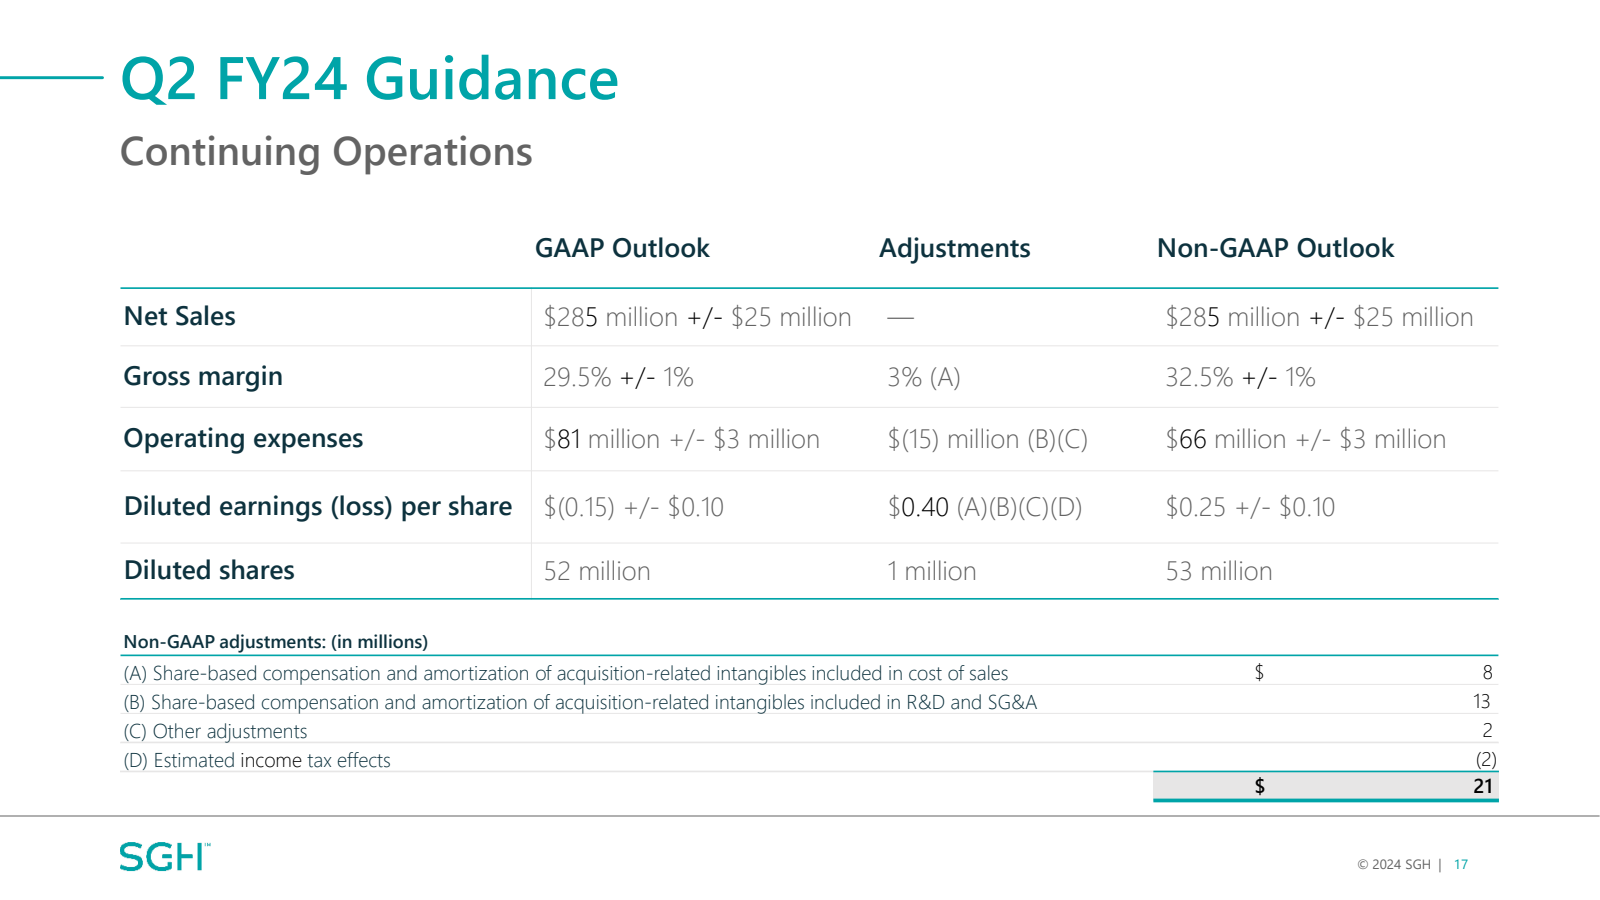 Q2 FY24 Guidance 
Co